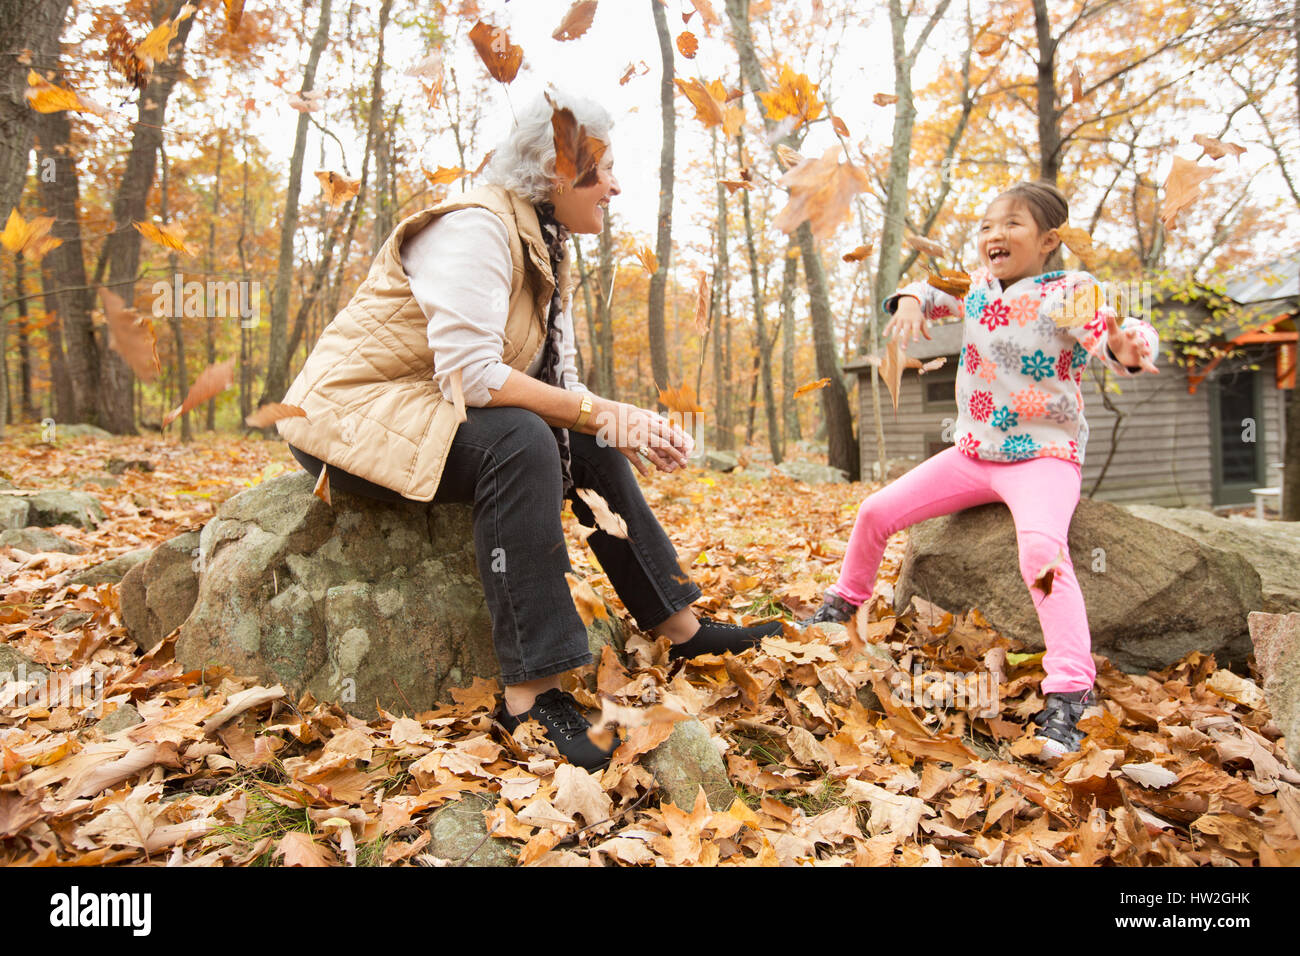 Grandmother and granddaughter playing with autumn leaves Stock Photo